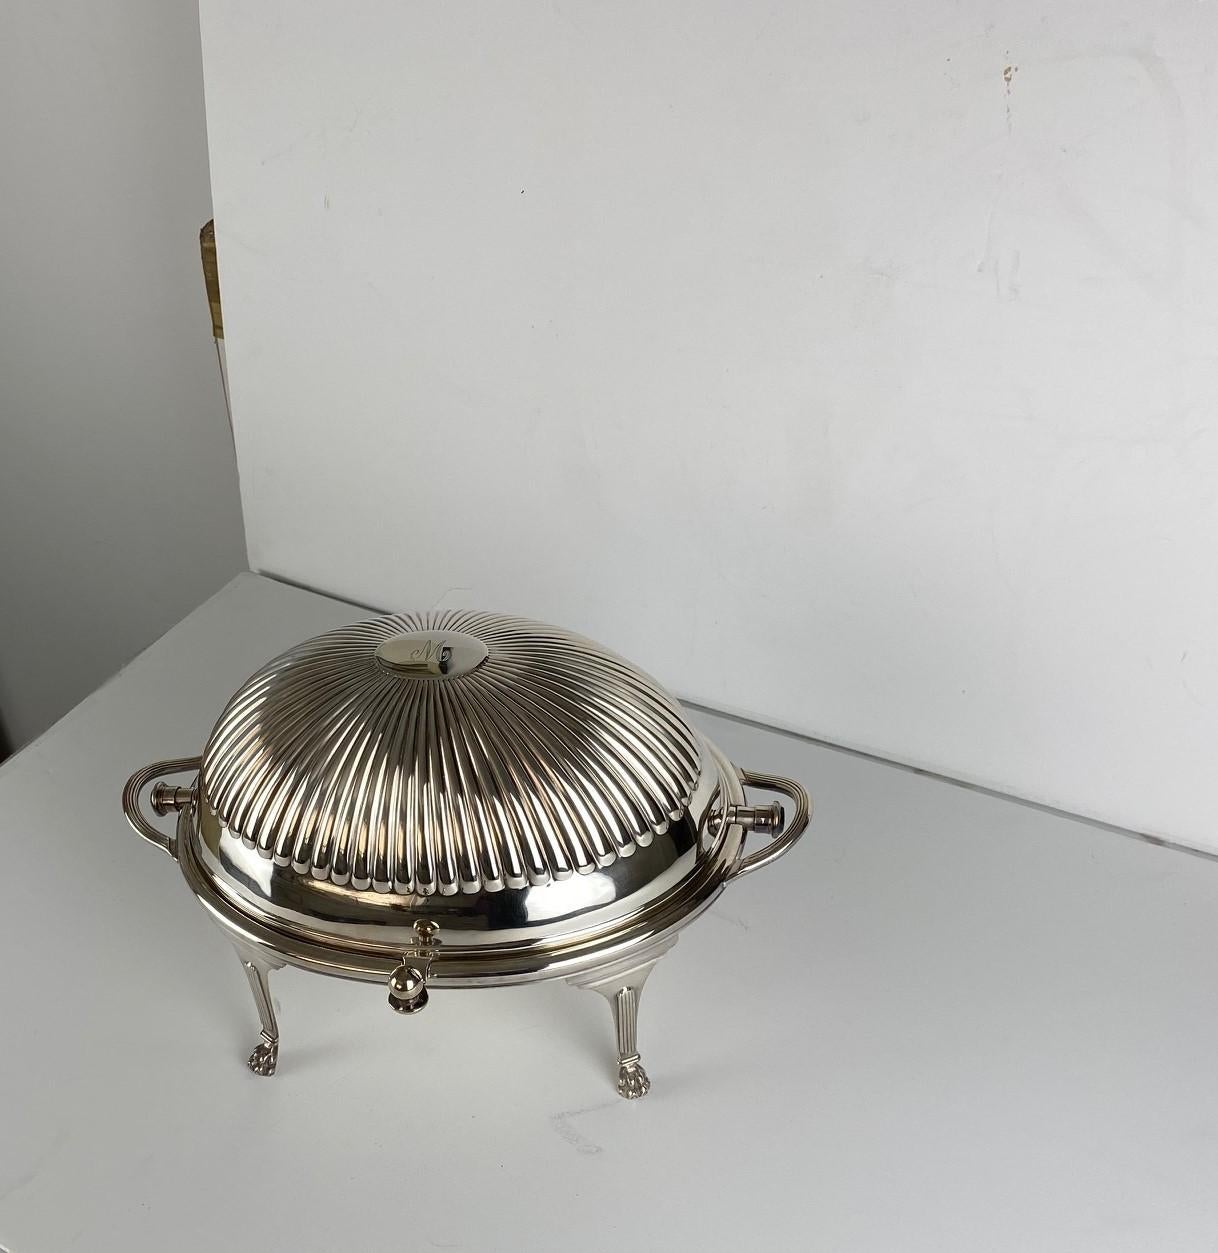 English Silver Plate Roll-Over Serving Dish In Good Condition For Sale In Pomona, CA